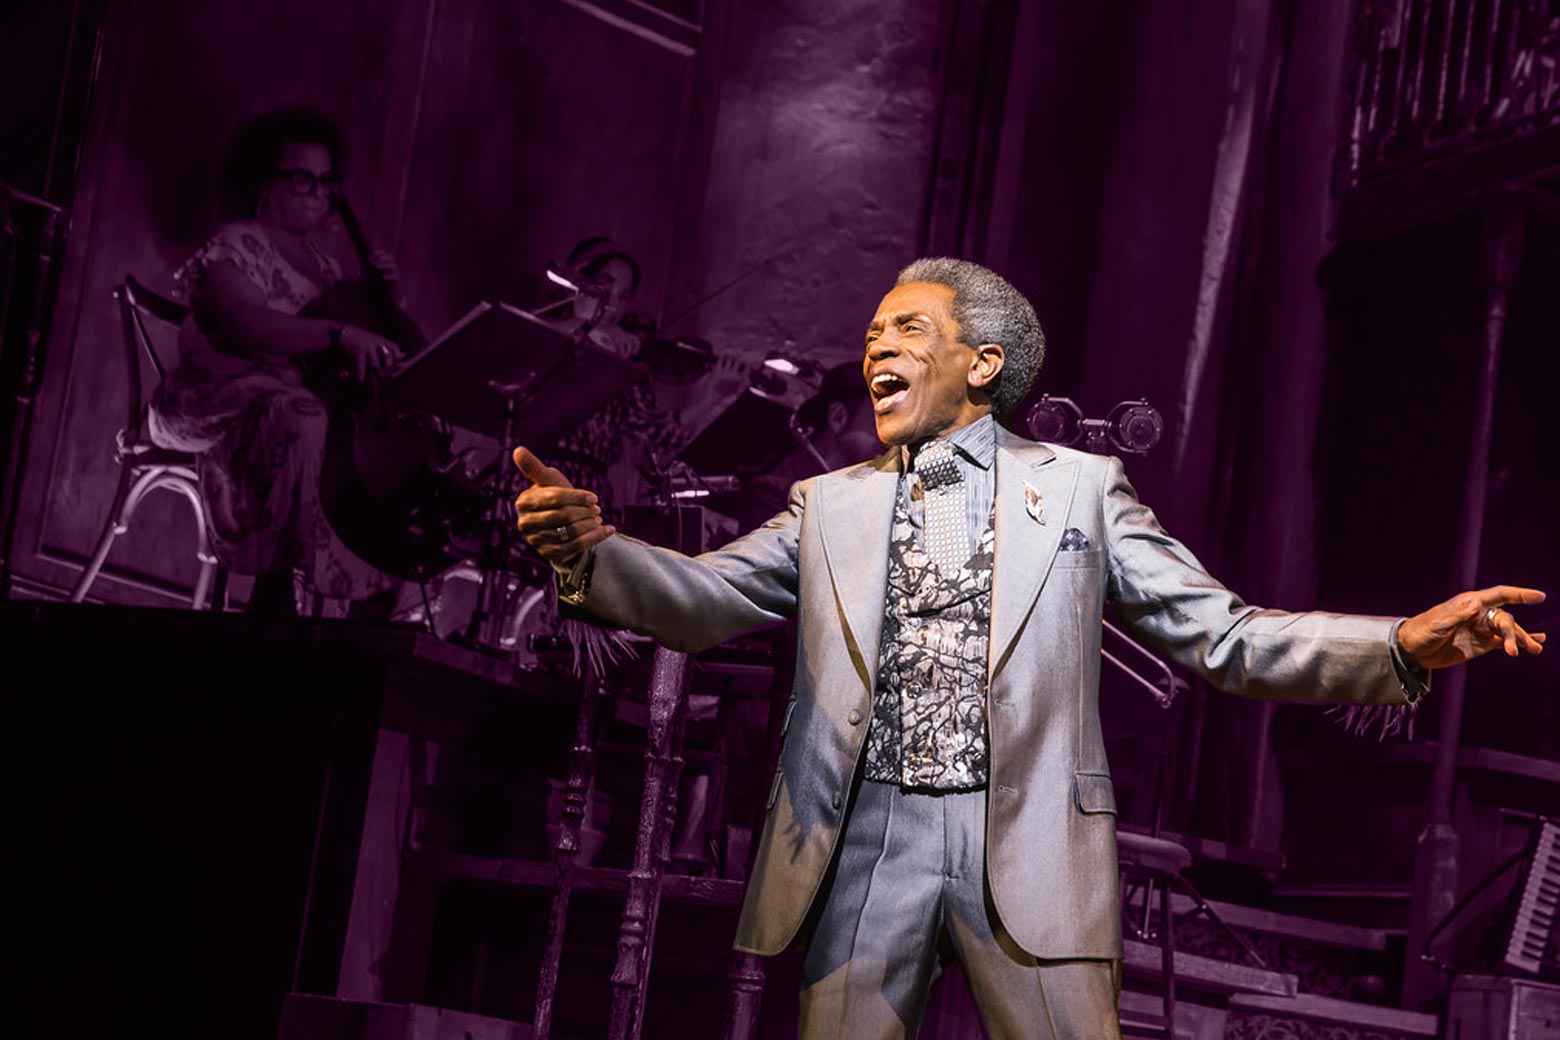 André De Shields singing onstage with his arms outstretched